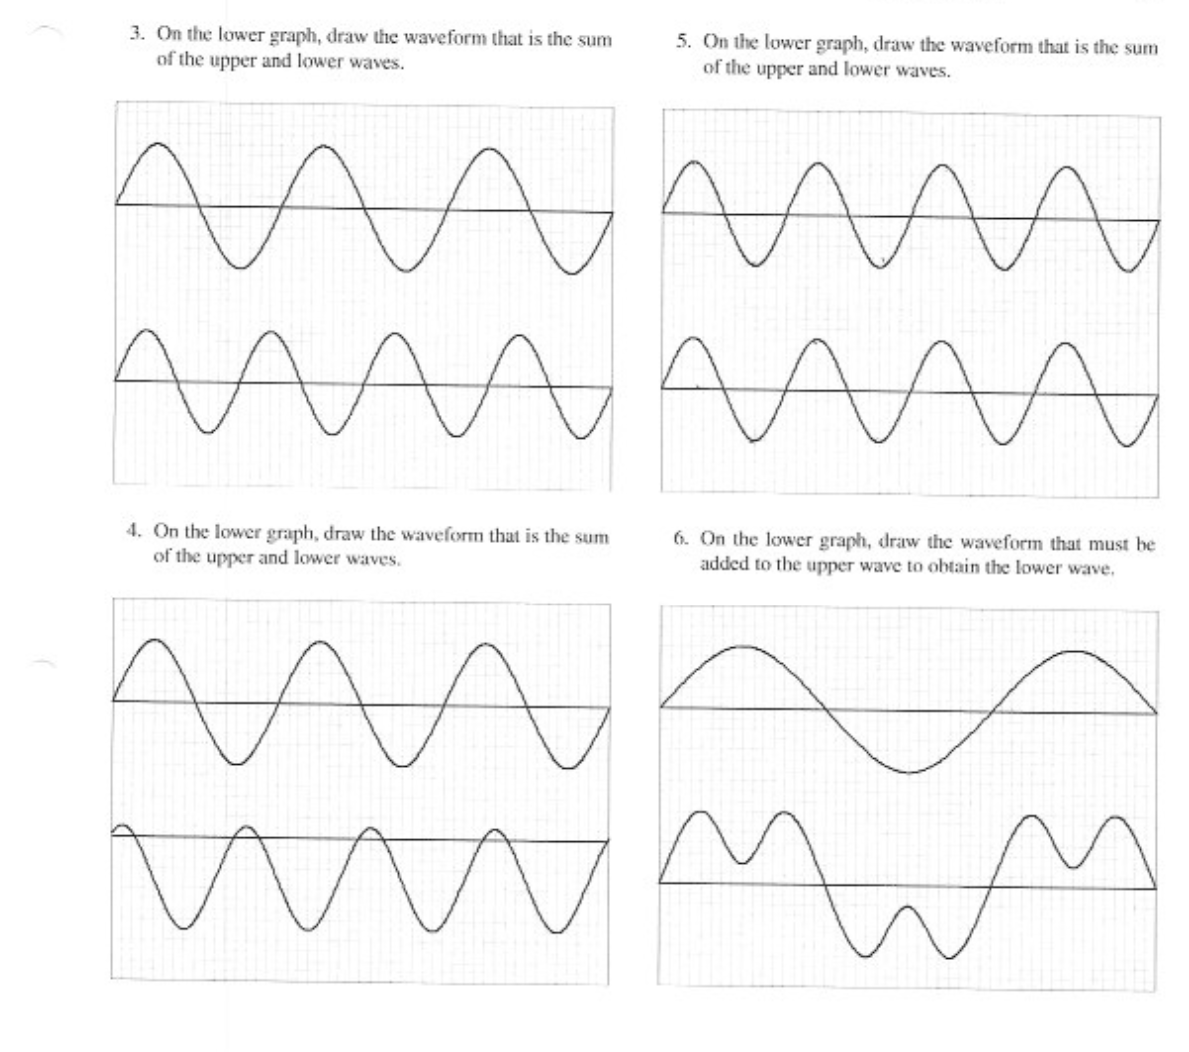 3. On the lower graph, draw the waveform that is the sum
of the upper and lower waves.
5. On the lower graph, draw the waveform that is the sum
of the upper and lower waves.
AMA
4. On the lower graph, draw the waveform that is the sum
of the upper and lower waves.
6. On the lower graph, draw the waveform that must be
added to the upper wave to obtain the lower wave.
